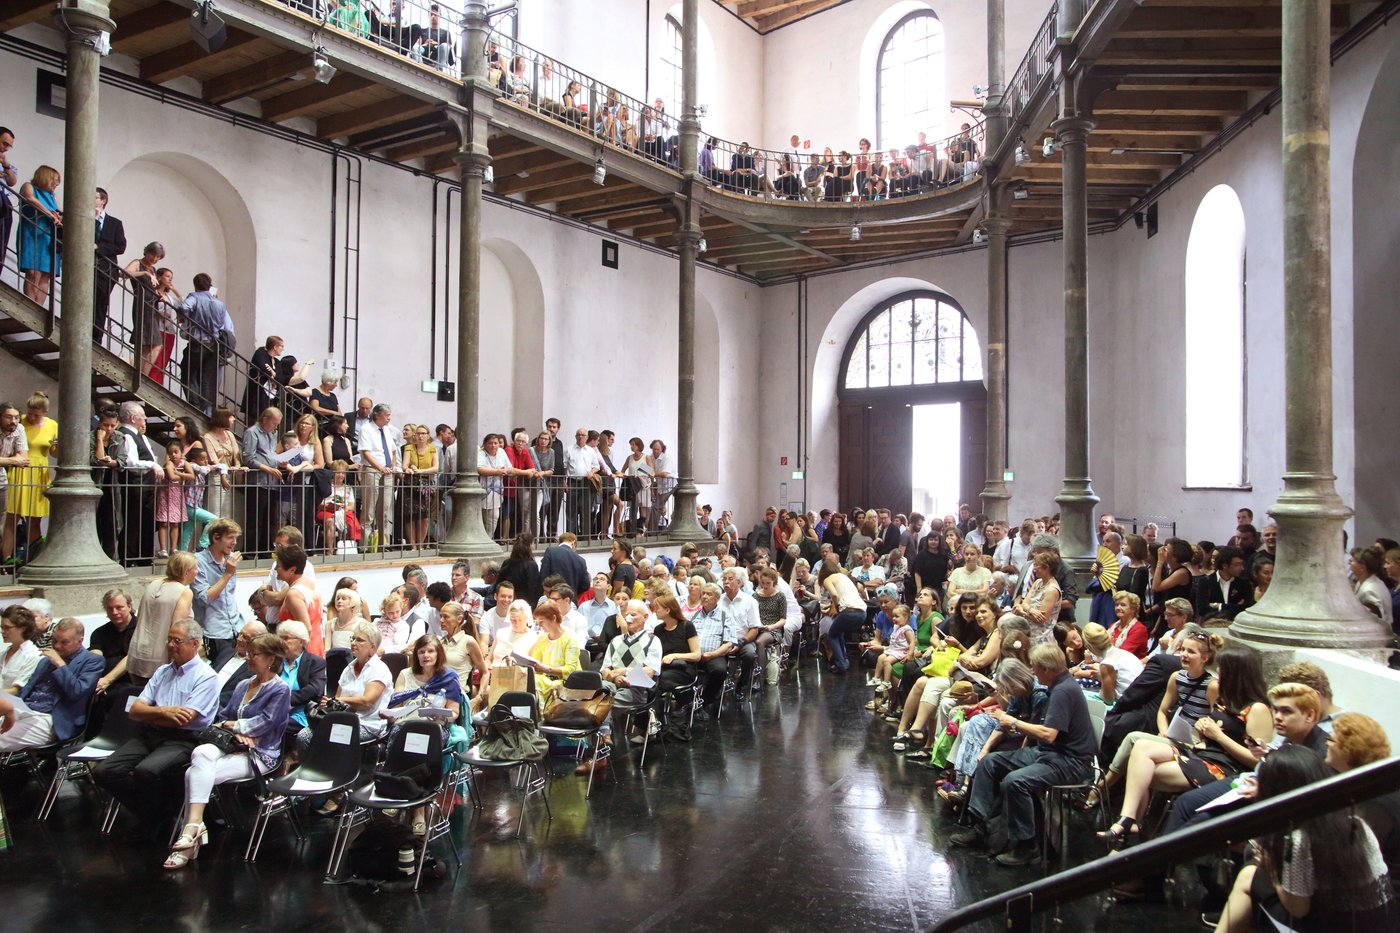 Many people are waiting in the Prospekthof (large high space over 4 floors with galleries on each floor) for the start of the 2016 graduation ceremony of the Academy of Fine Arts Vienna.